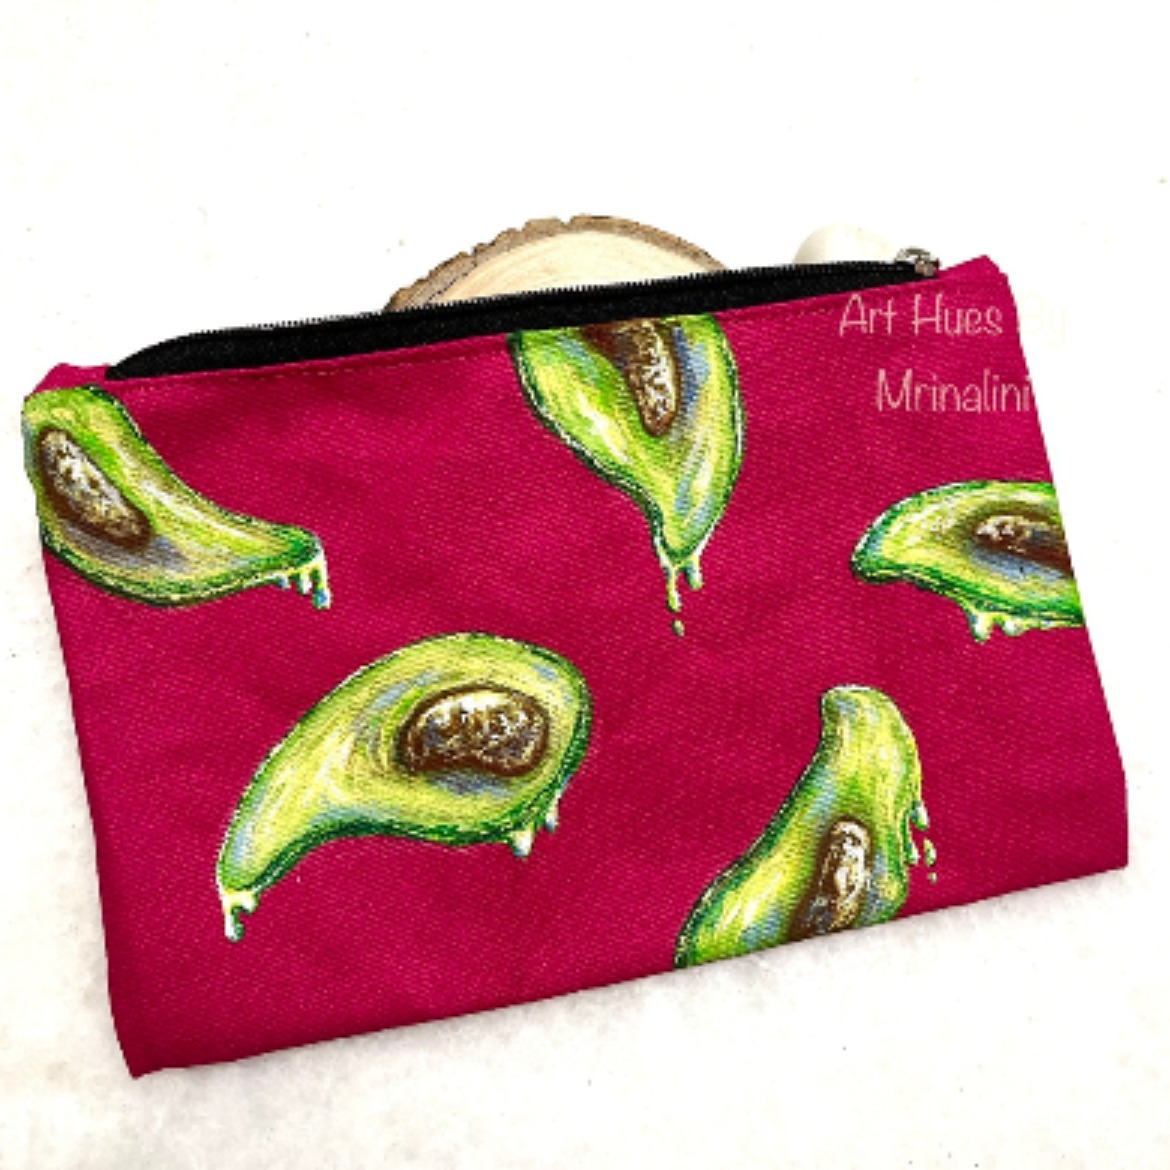 Avocado hand painted multipurpose fabric pouch, Dali inspired quirky melting Avocados